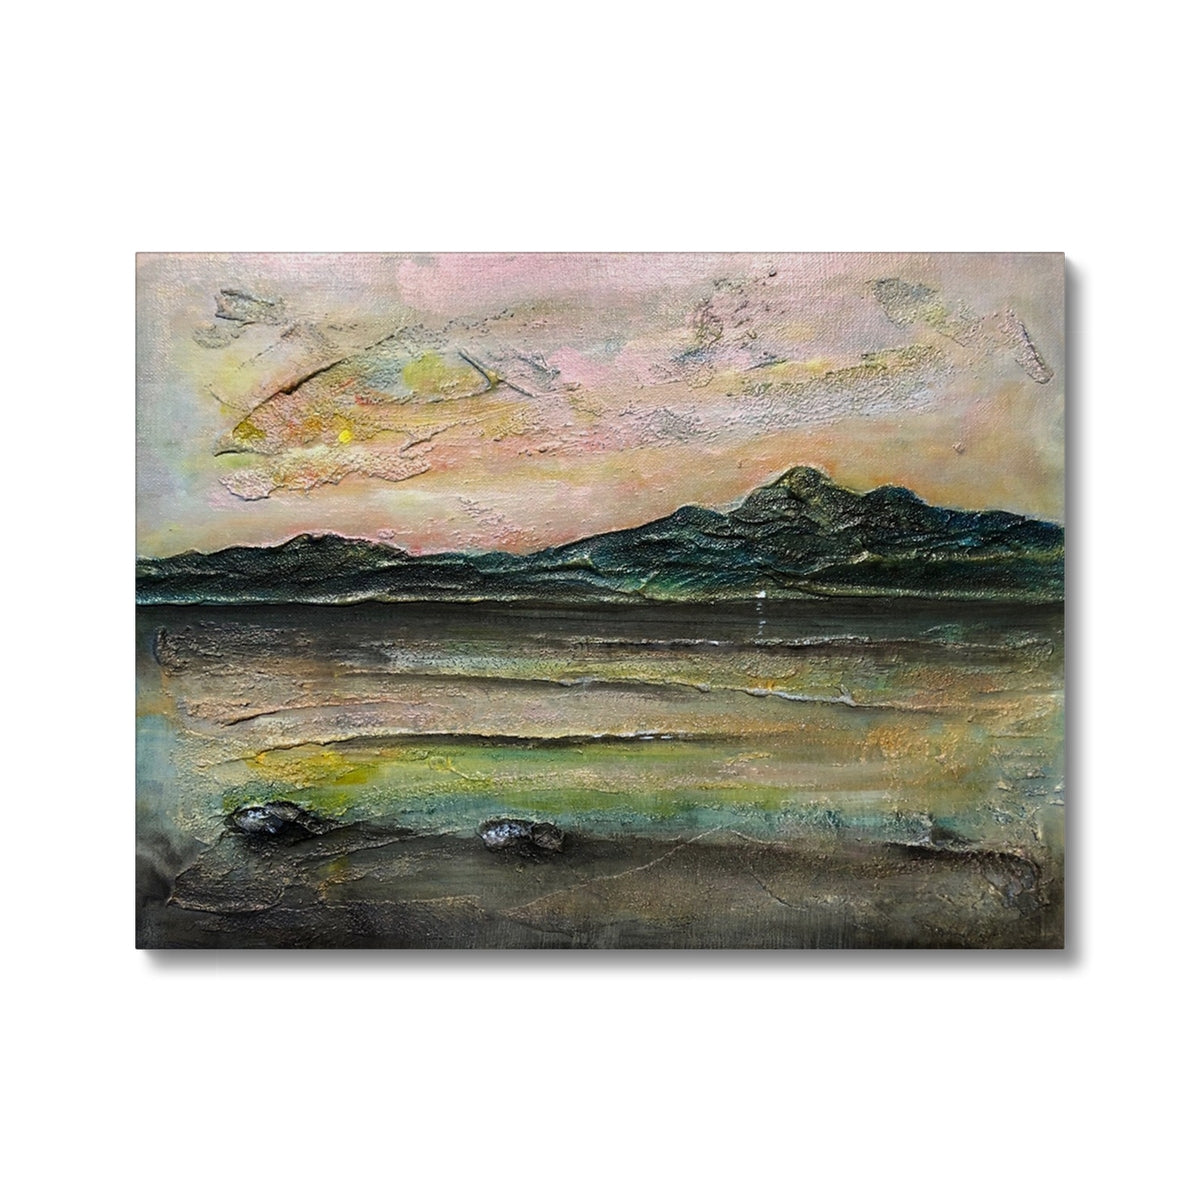 An Ethereal Loch Na Dal Skye Painting | Canvas From Scotland-Contemporary Stretched Canvas Prints-Scottish Lochs & Mountains Art Gallery-24"x18"-Paintings, Prints, Homeware, Art Gifts From Scotland By Scottish Artist Kevin Hunter